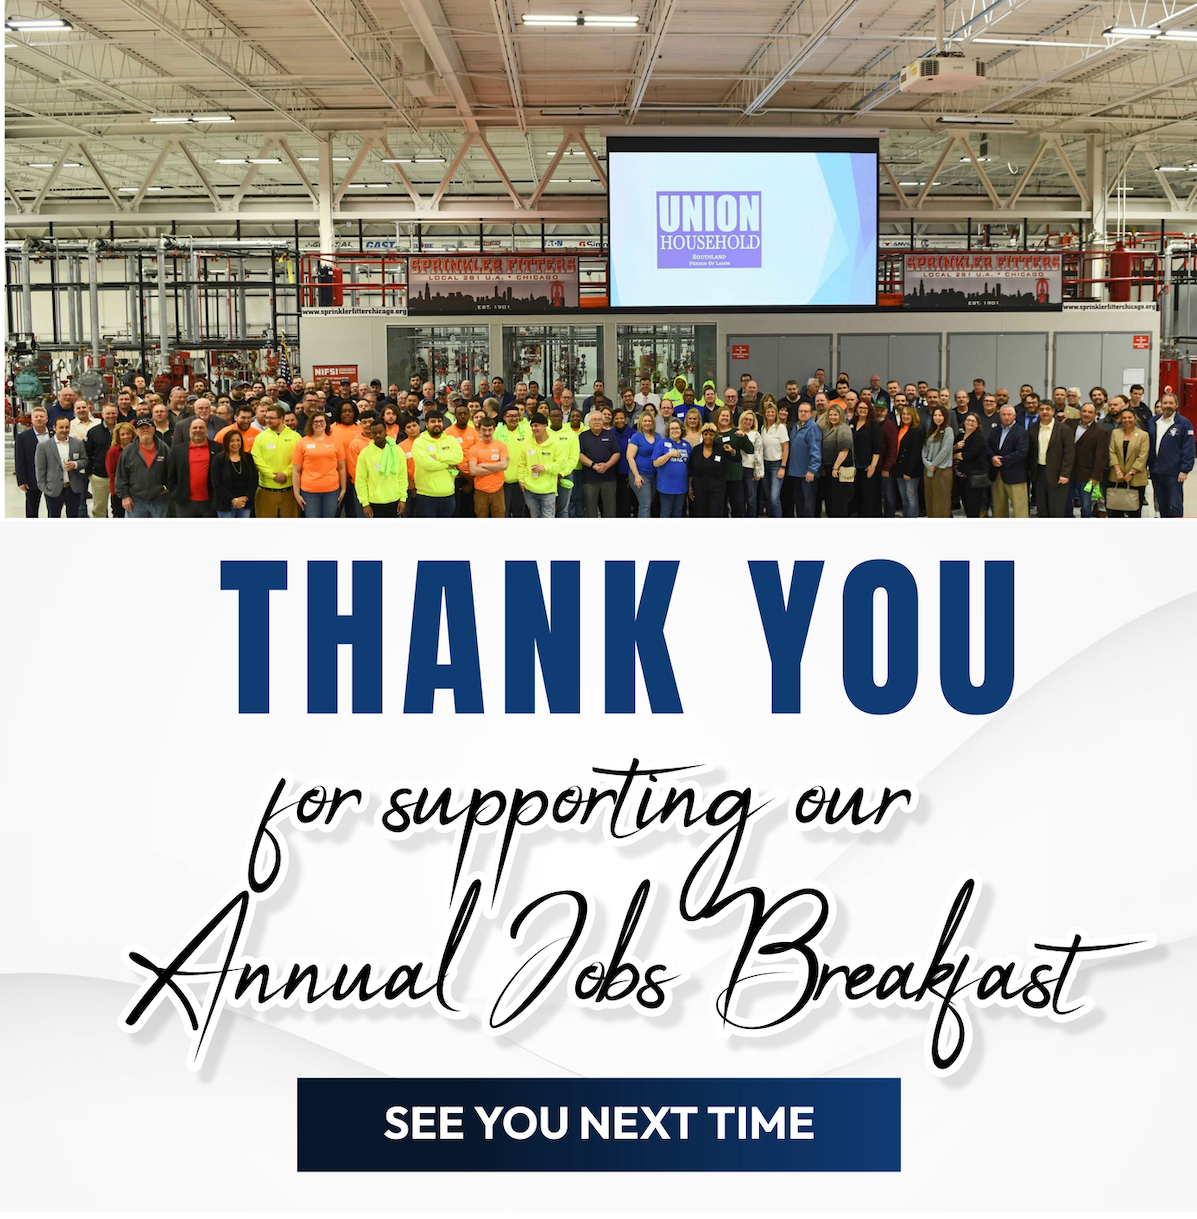 Thank you for supporting our Annual Jobs Breakfast.